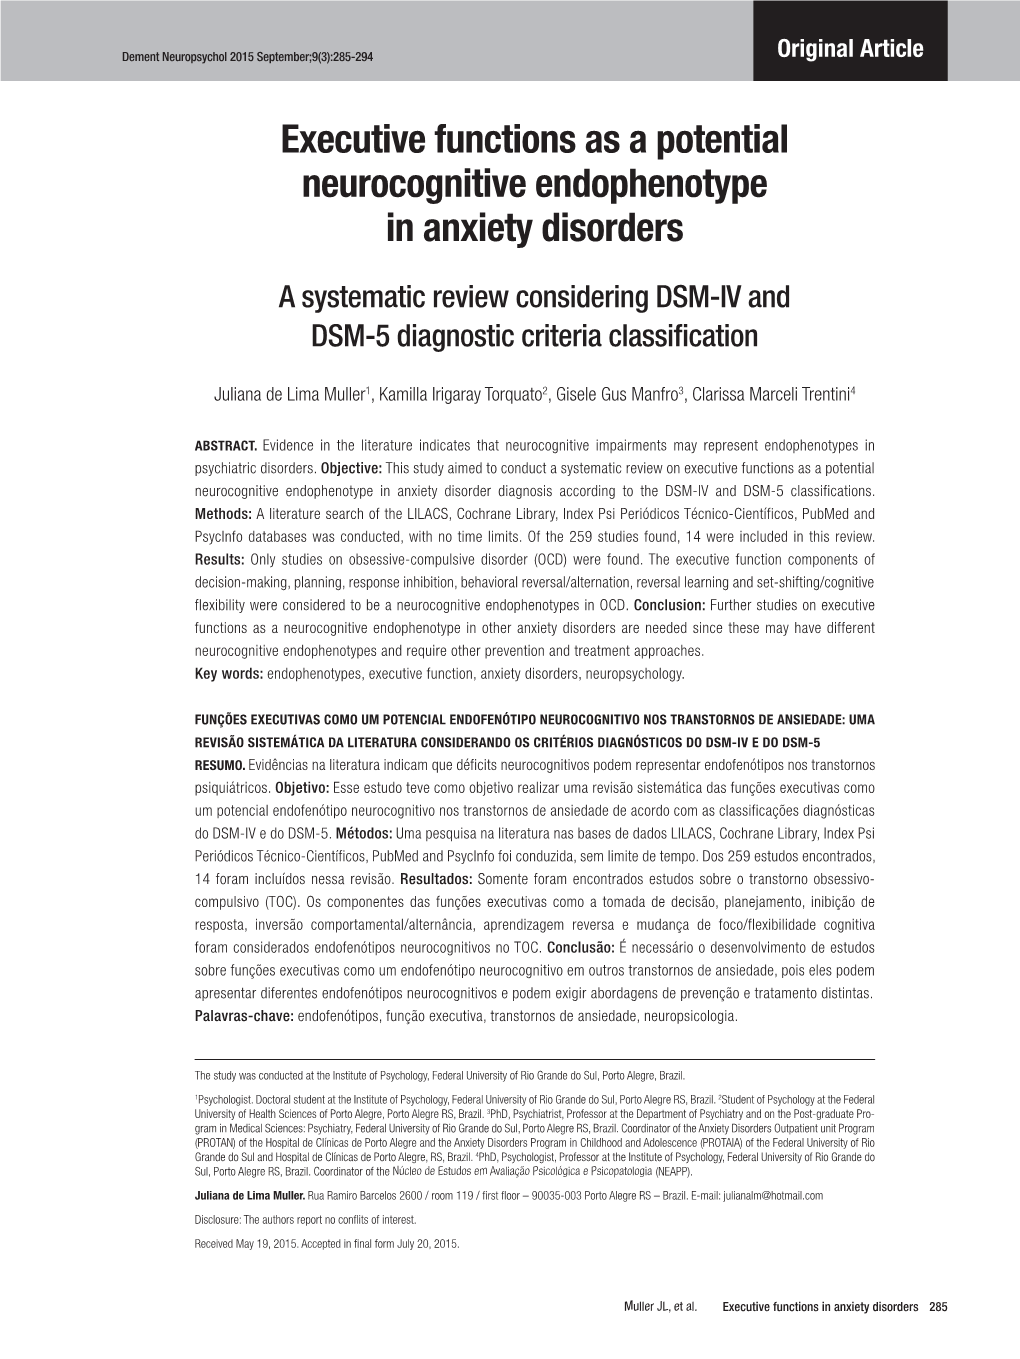 Executive Functions As a Potential Neurocognitive Endophenotype in Anxiety Disorders